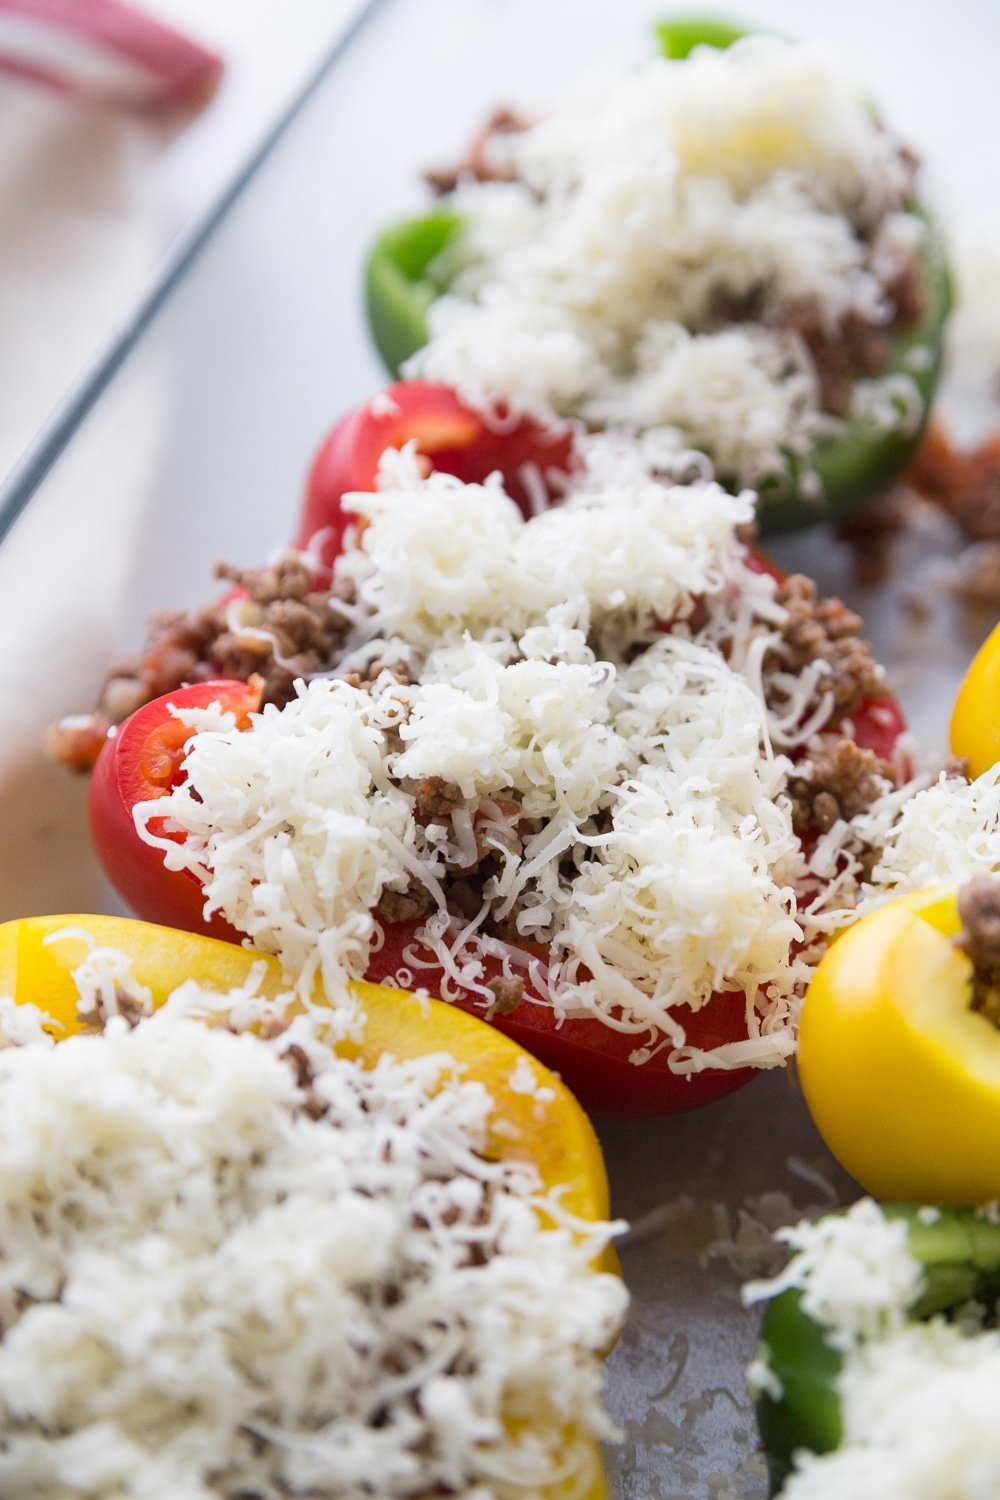 Cheese being sprinkled on top of the bell peppers of the keto stuffed peppers recipe